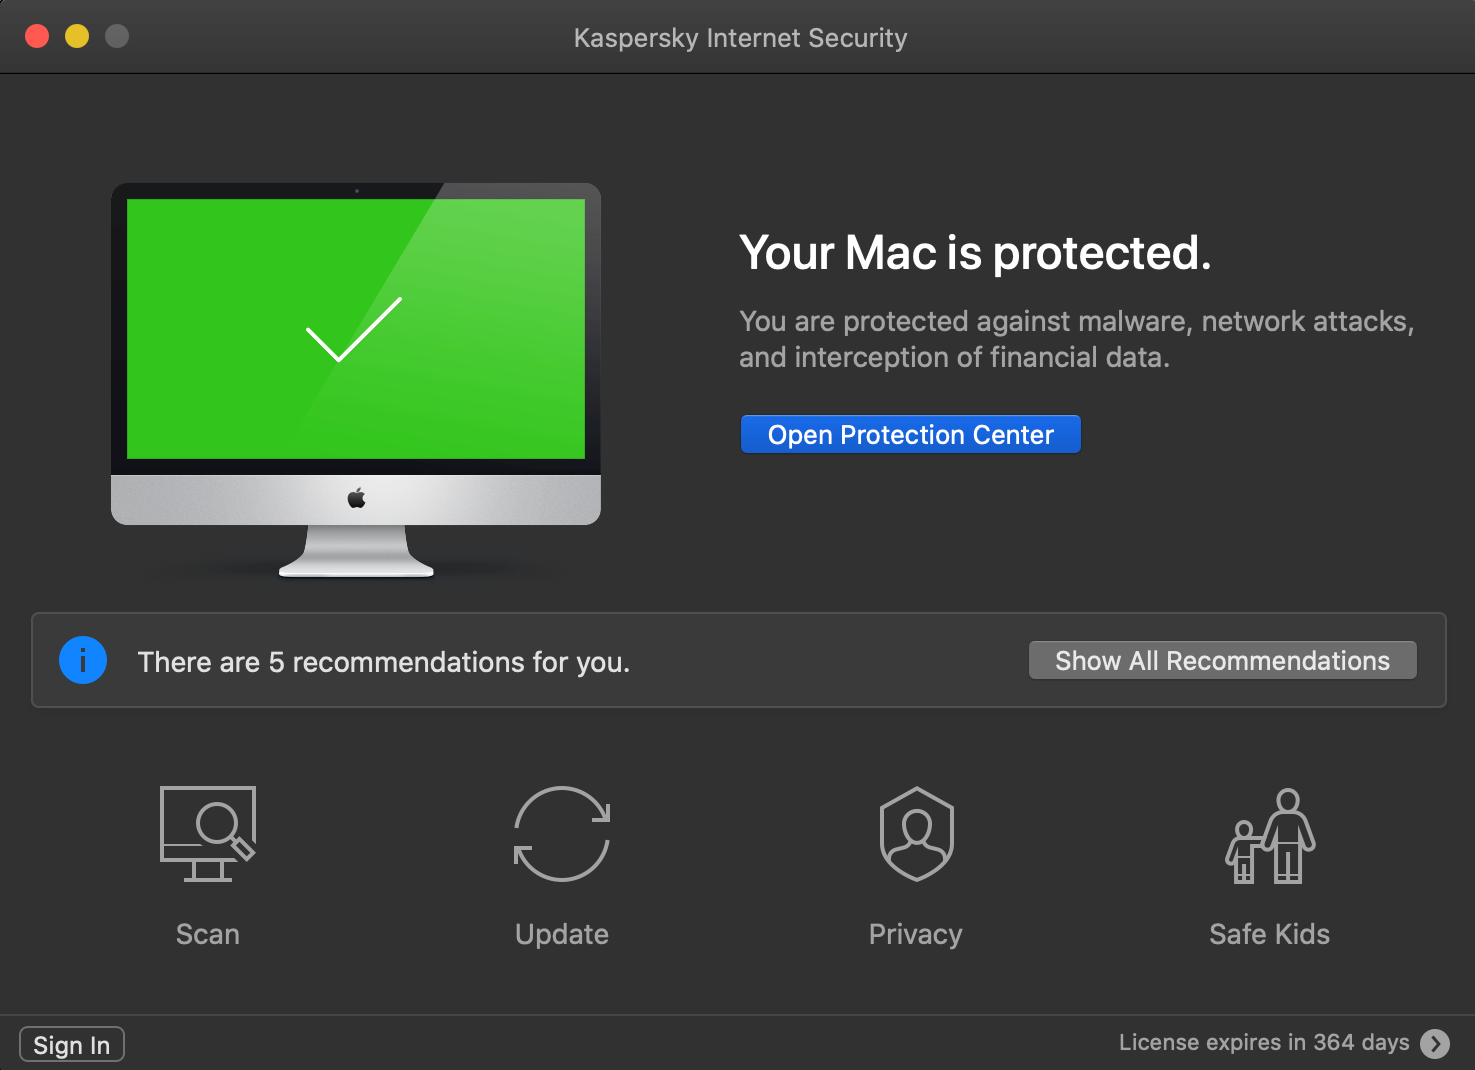 do i need internet security for mac